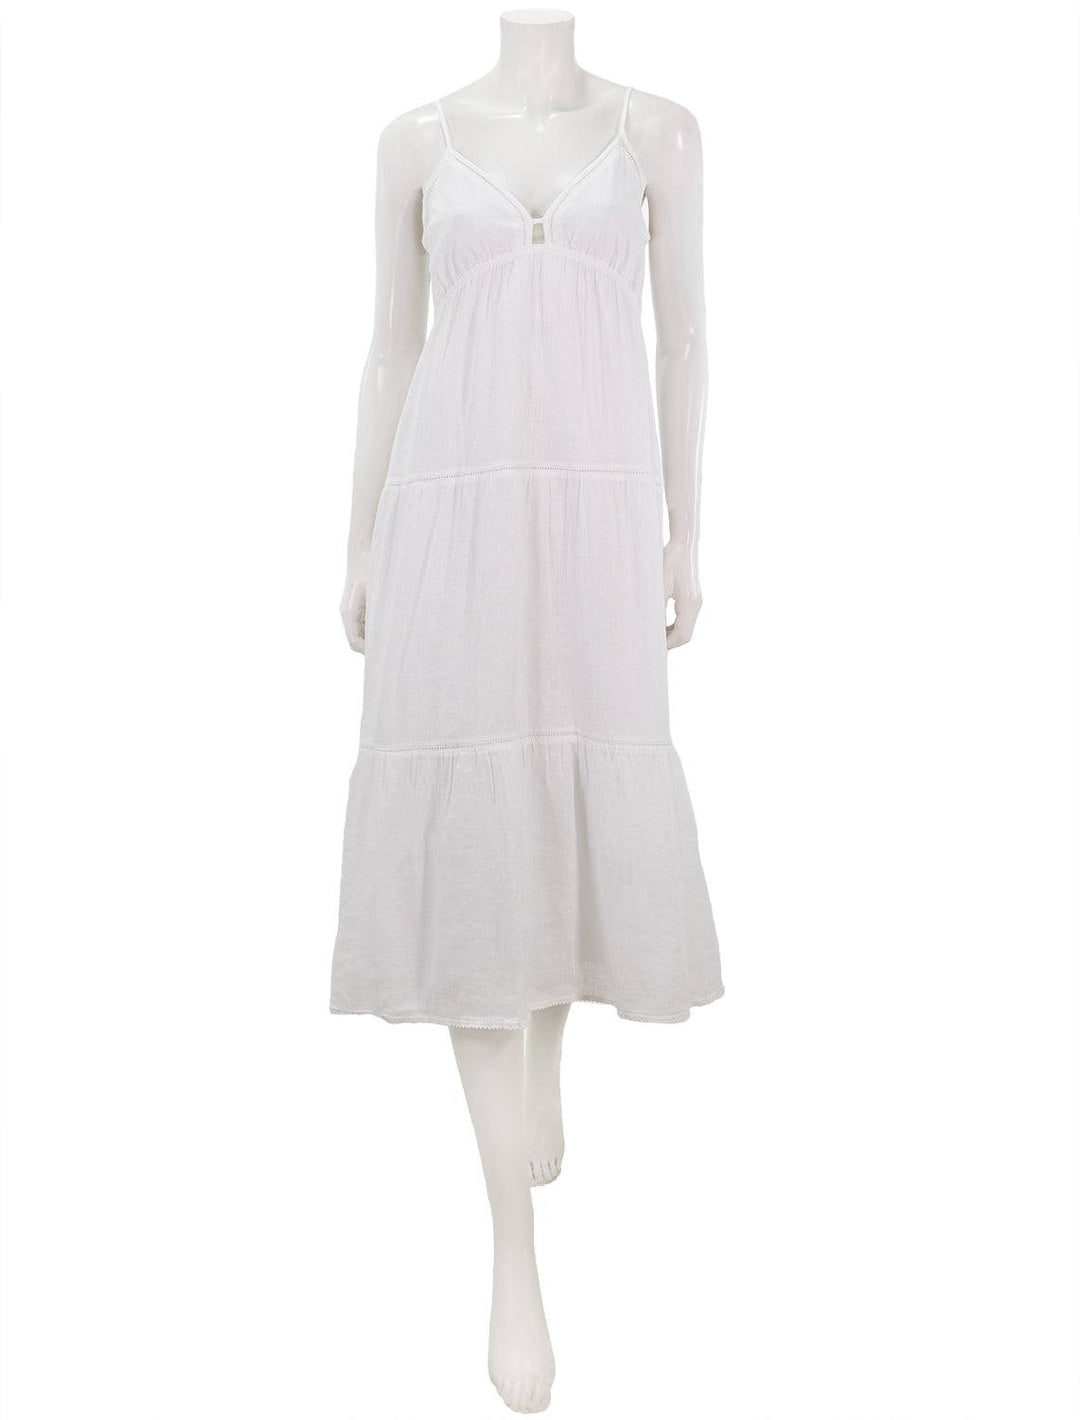 Front view of Rails' avril dress in white lace detail.